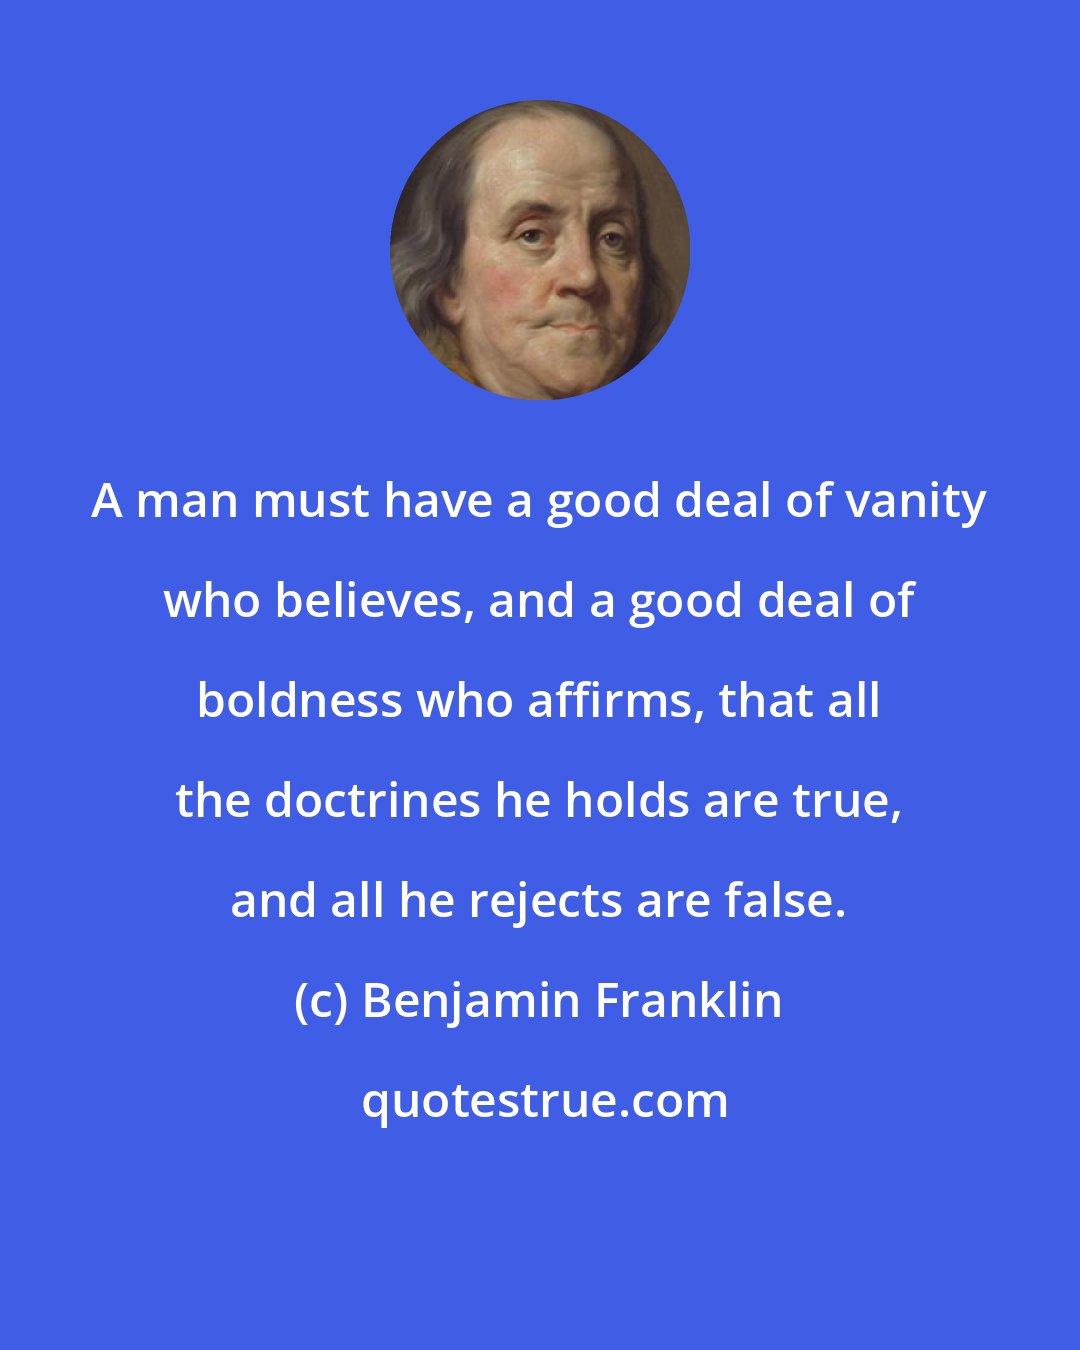 Benjamin Franklin: A man must have a good deal of vanity who believes, and a good deal of boldness who affirms, that all the doctrines he holds are true, and all he rejects are false.